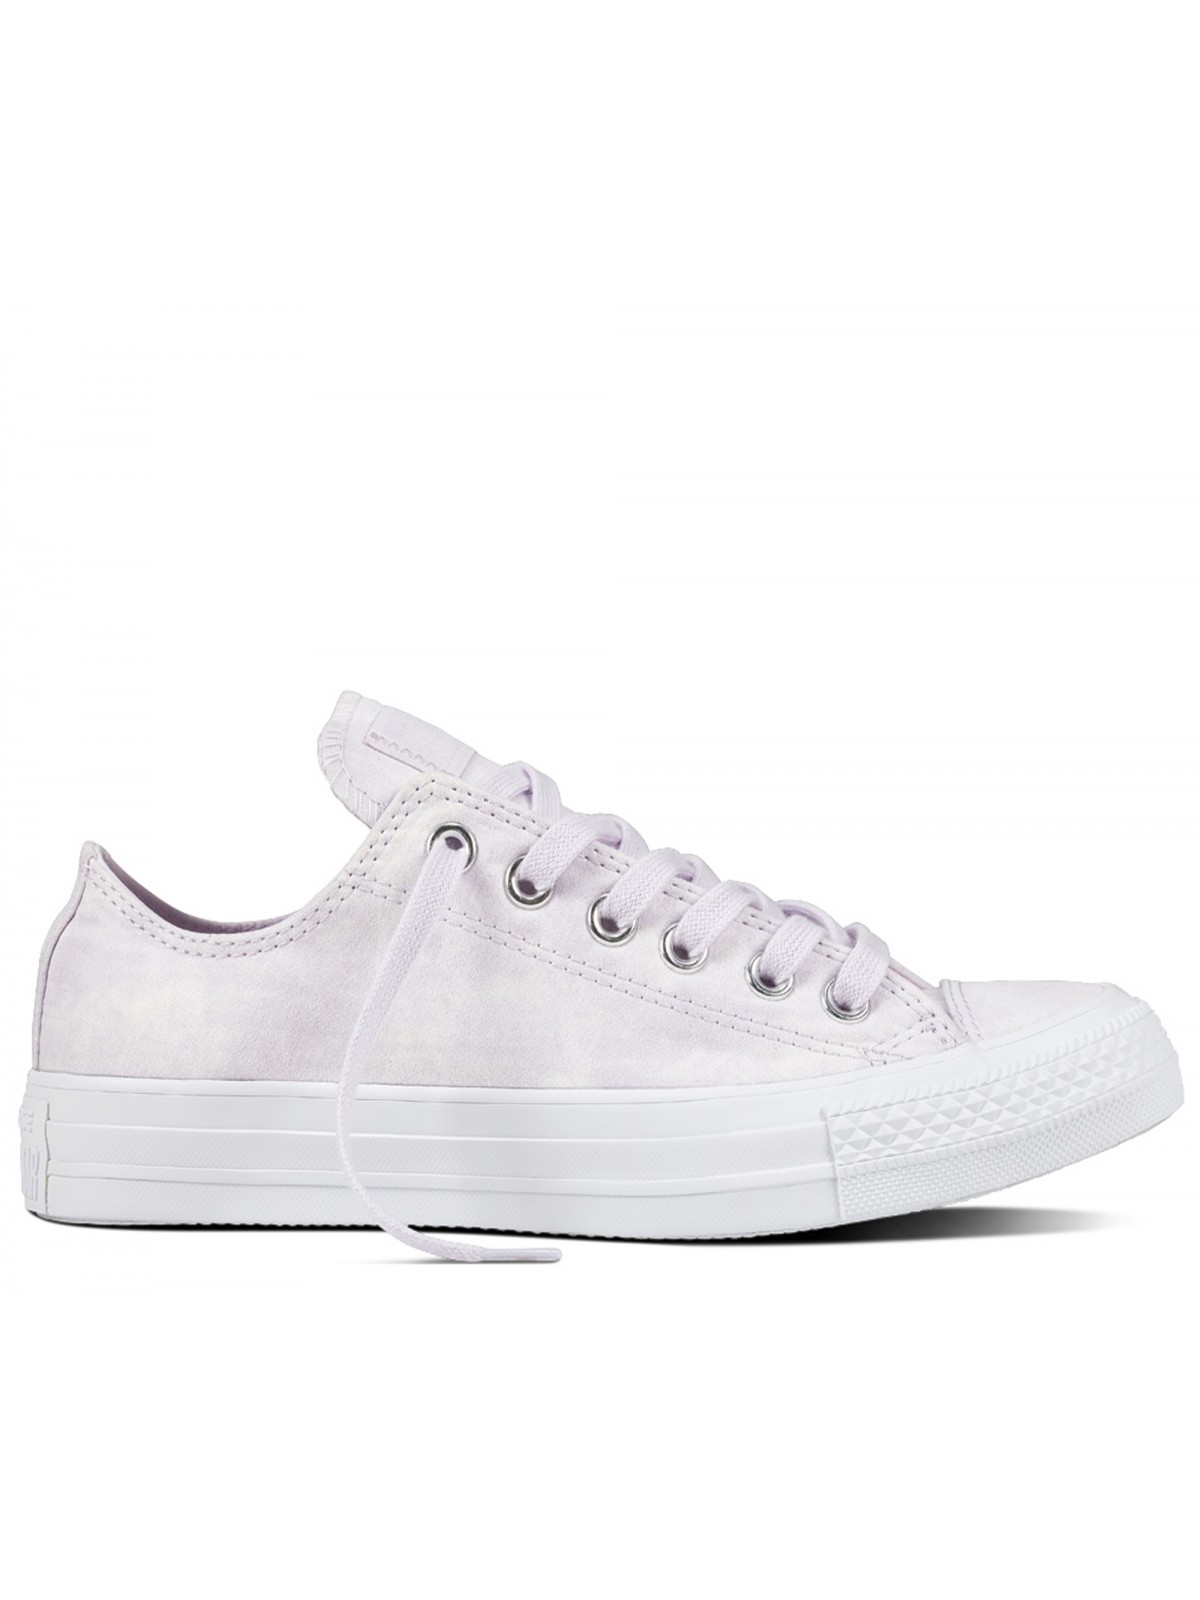 Converse Chuck Taylor all star basse tie & dye grappe